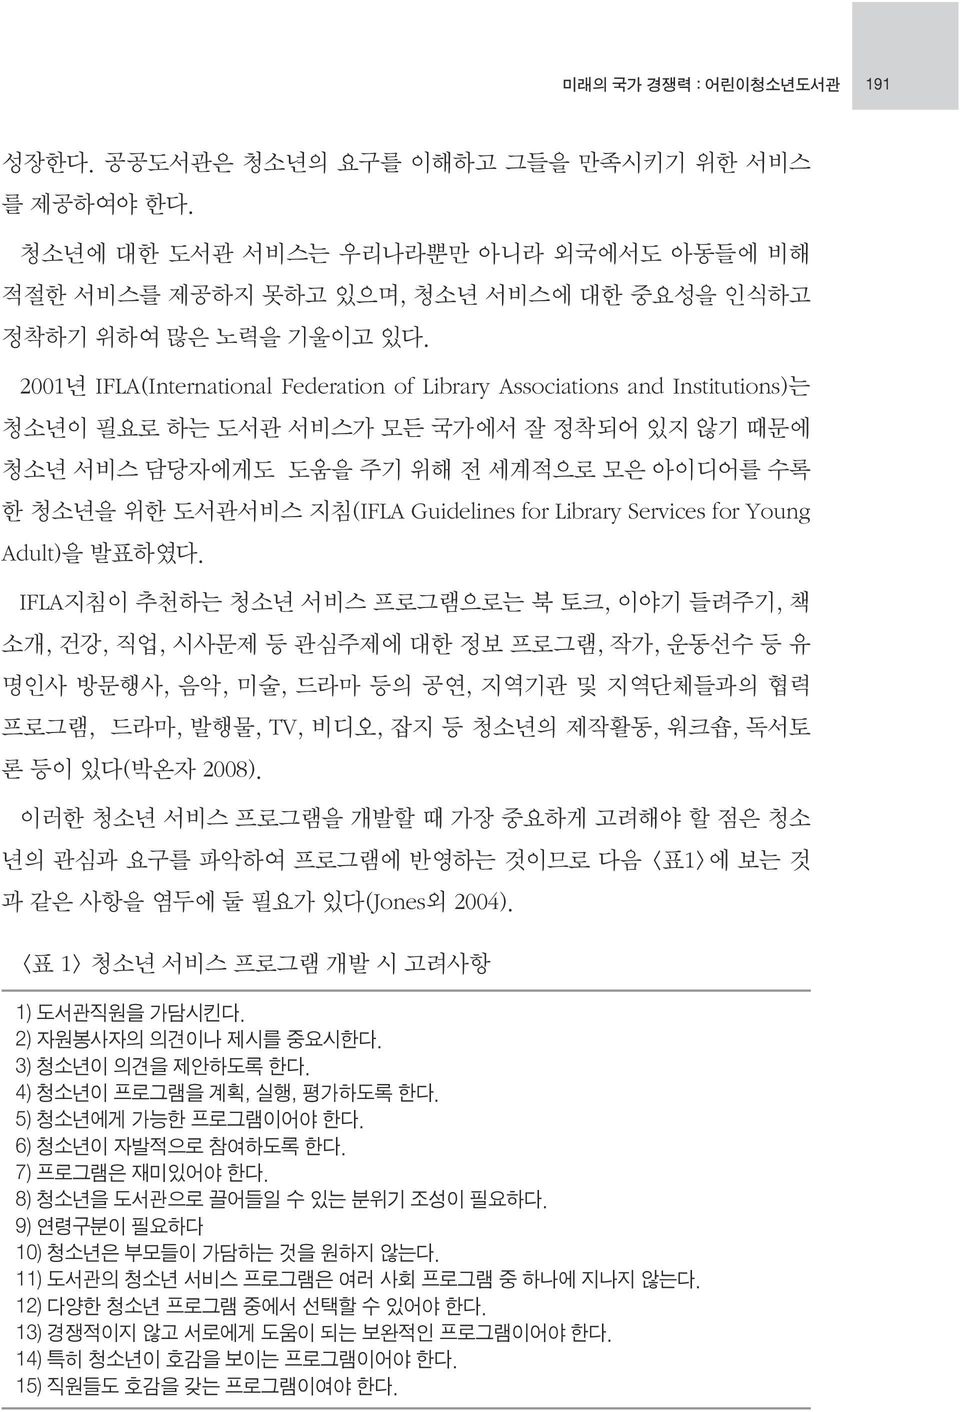 Guidelines for Library Services for Young Adult)을 발표하였다.